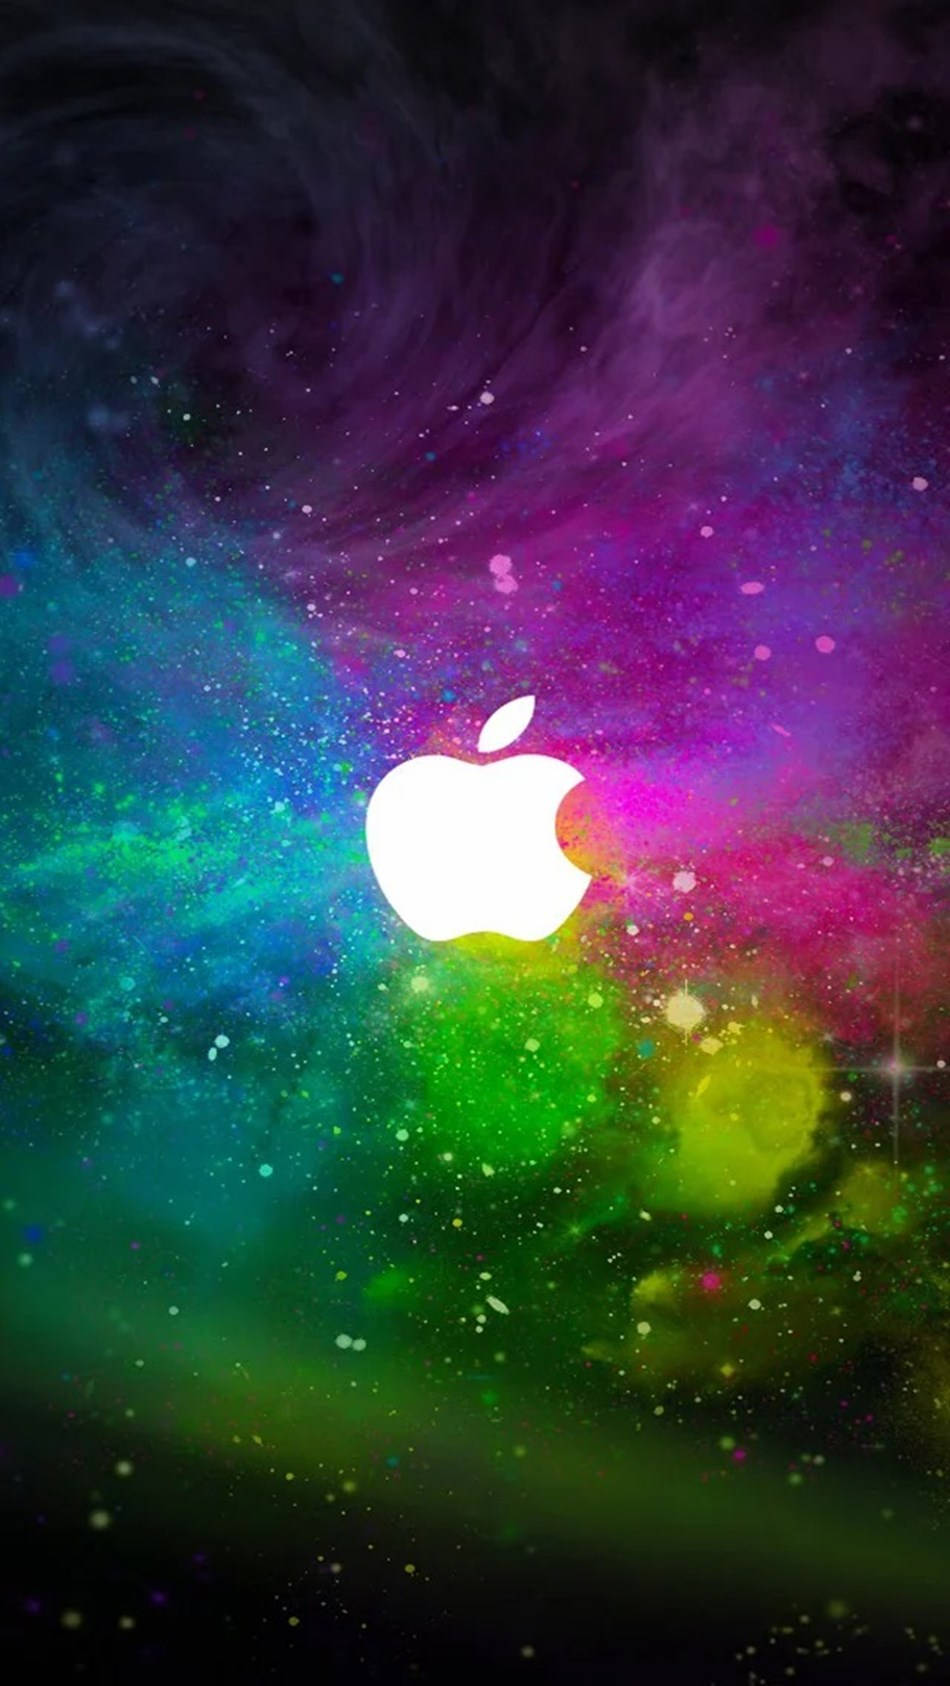 iPod touch Wallpapers — Basic Apple Guy